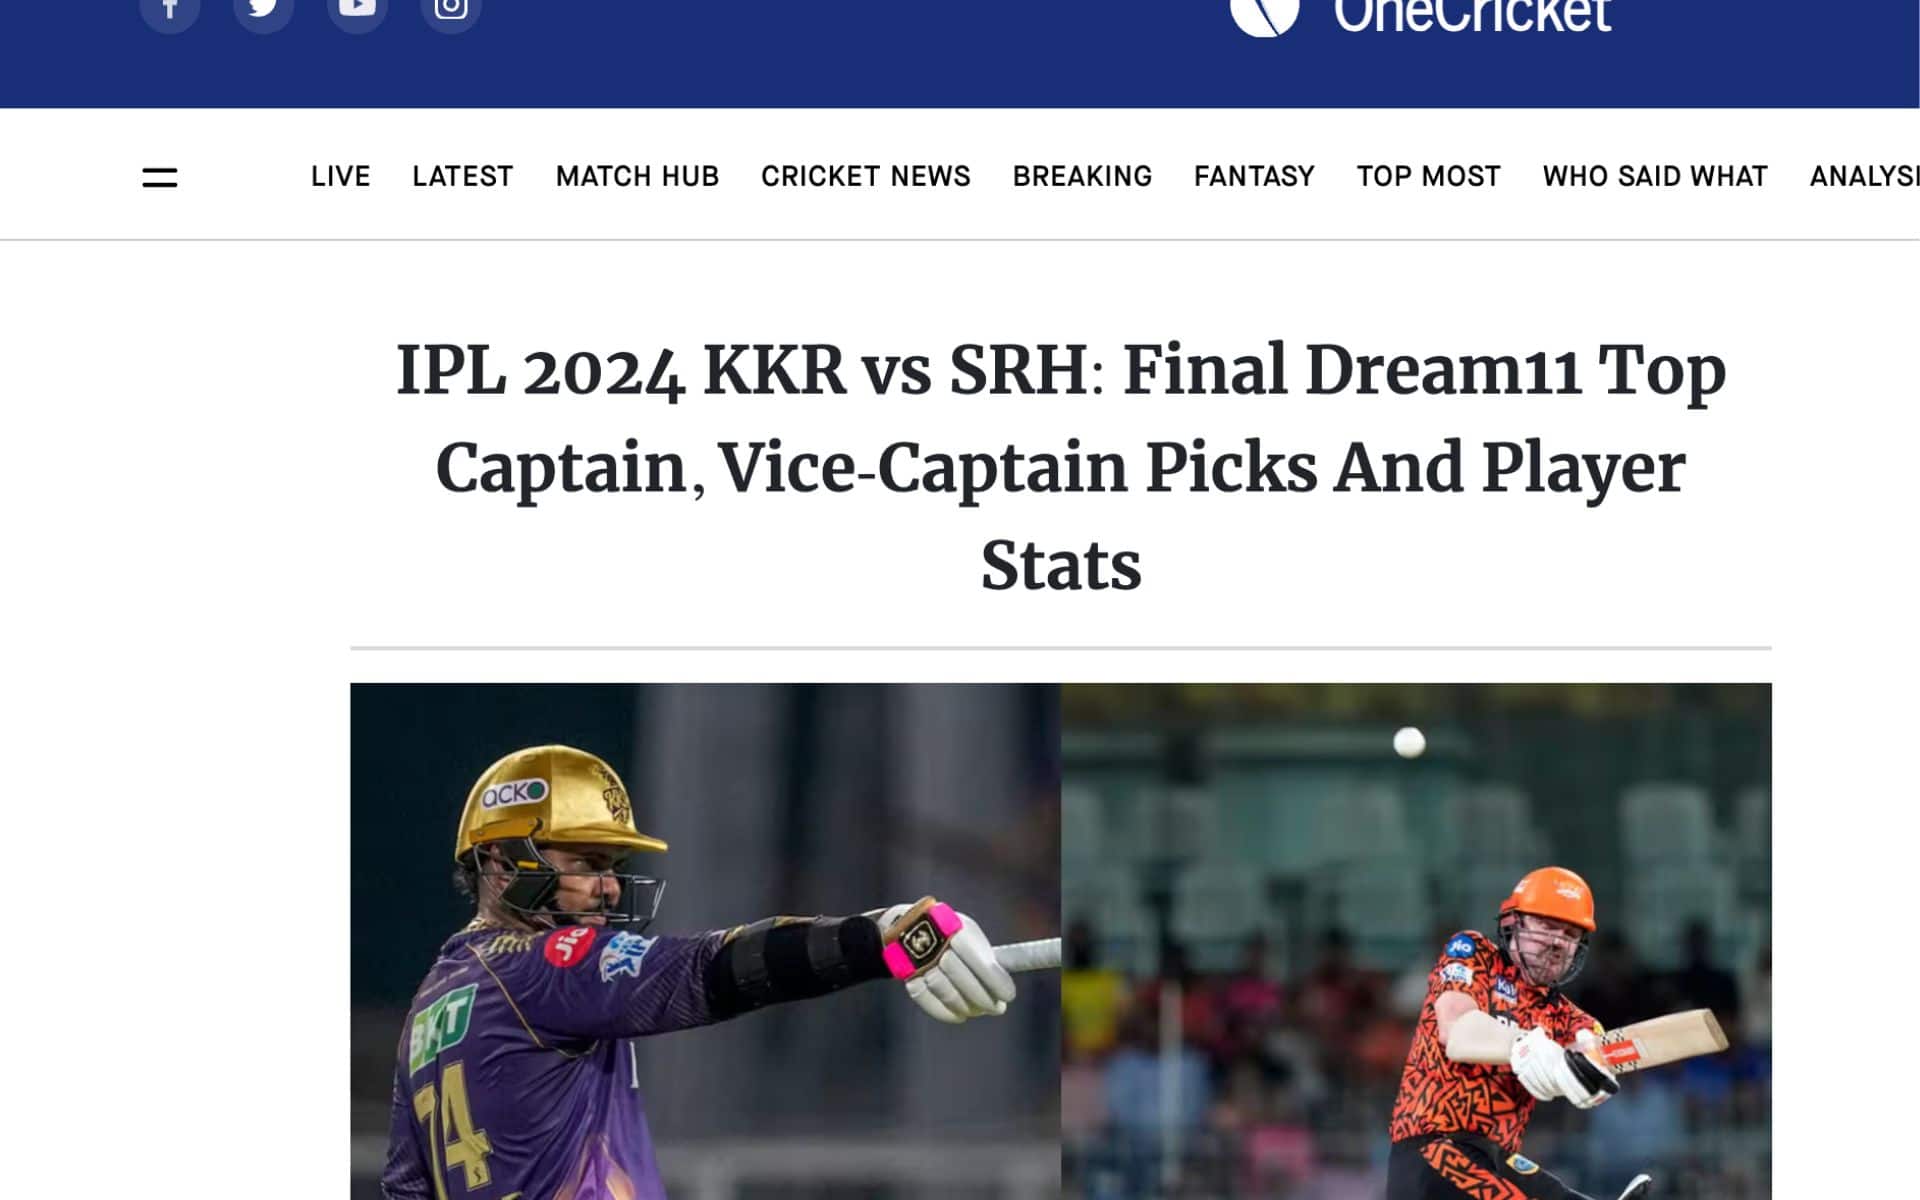 OneCricket's top captain and vice-captain articles [OneCricket]